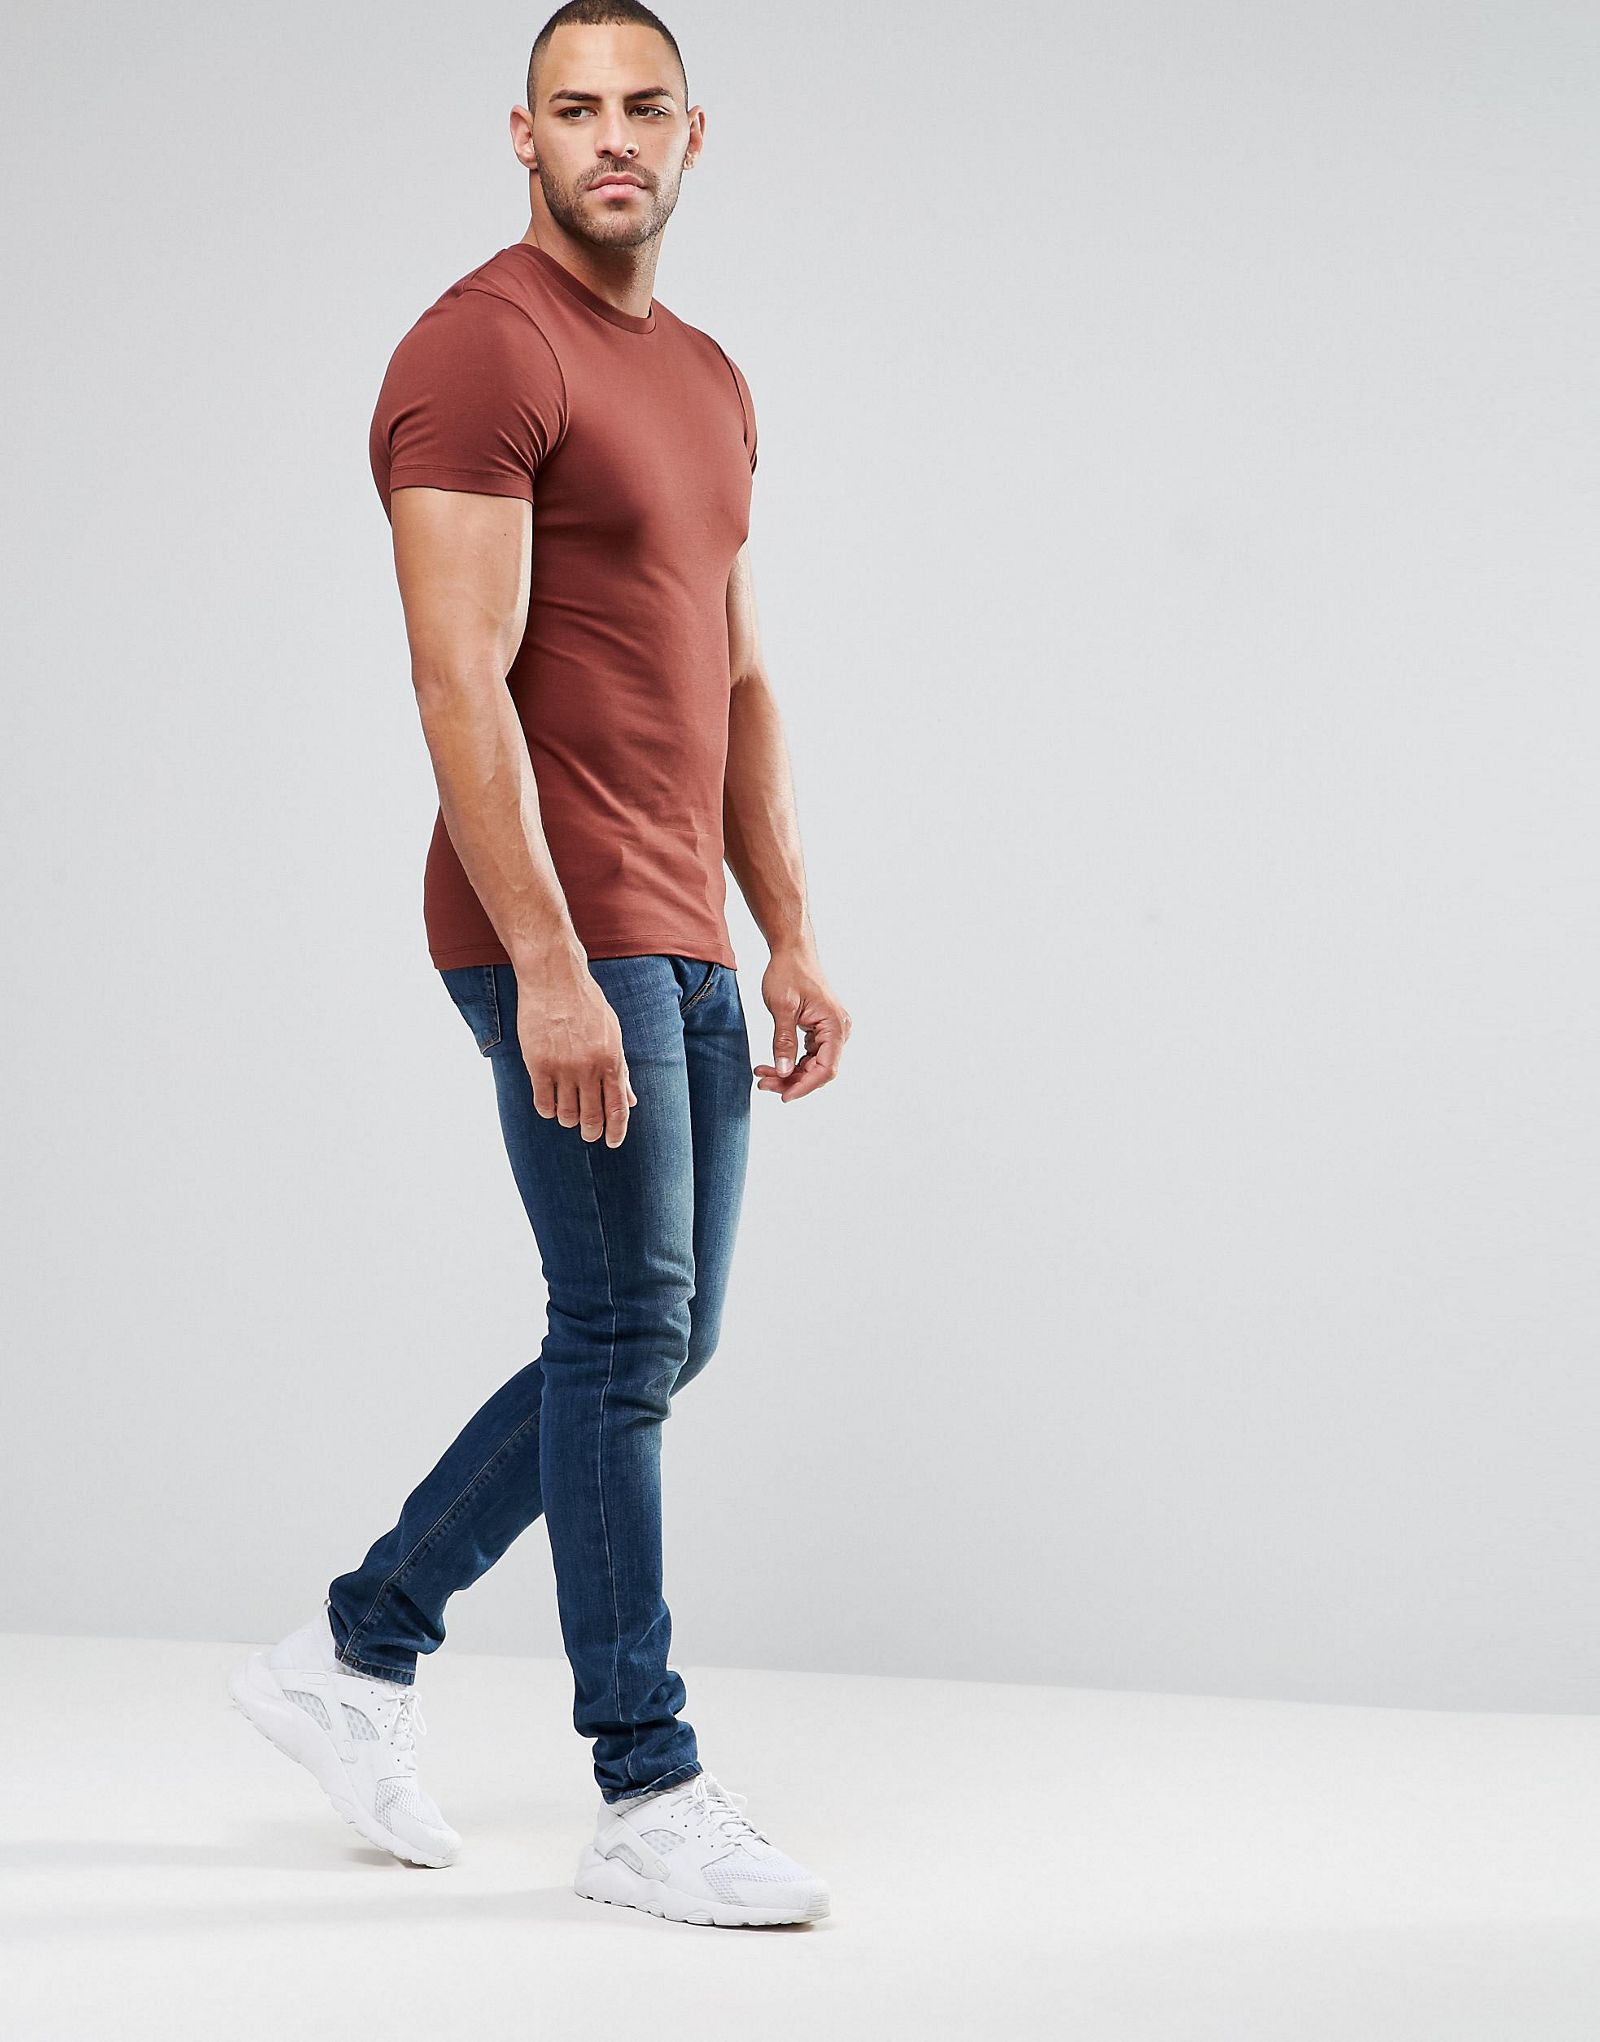 ASOS 2 Pack Extreme Muscle T-Shirt SAVE 17% In Khaki/Chestnut